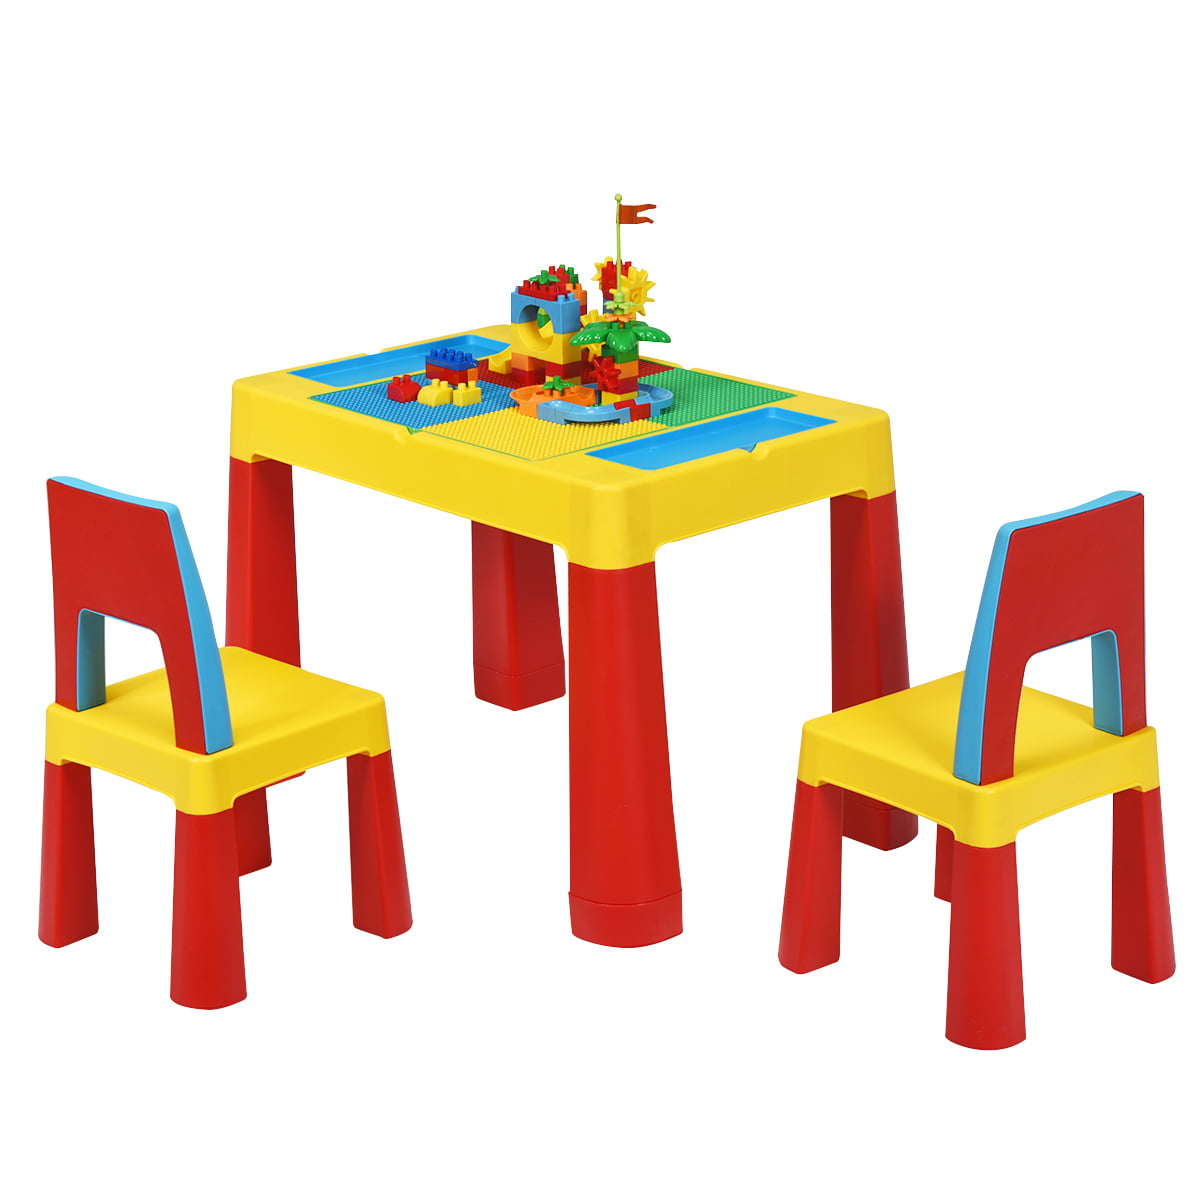 children's arts and crafts table and chairs